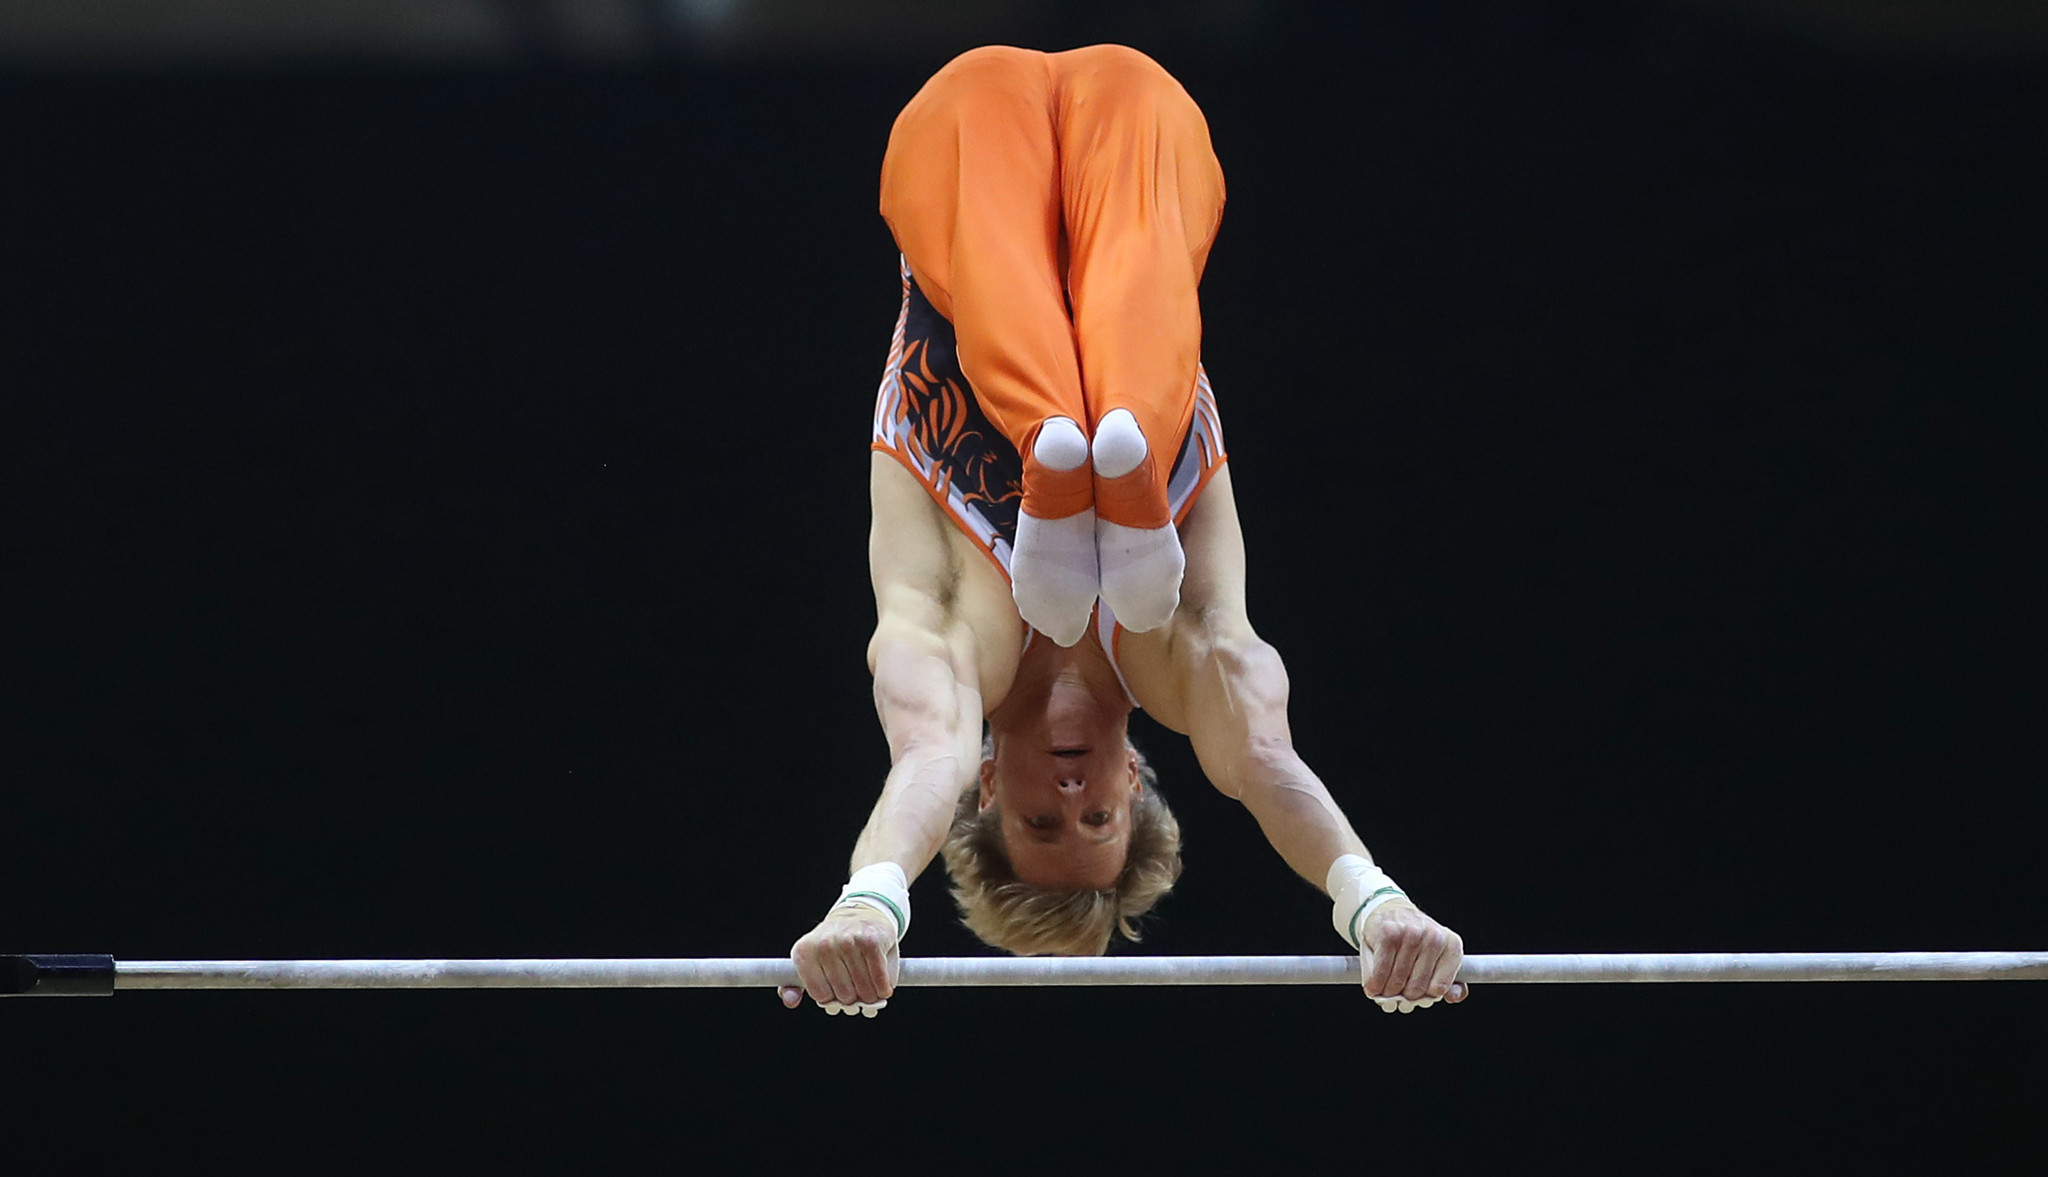 Olympic gold medallist Zonderland wins horizontal bar title at Gymnastics World Cup in Melbourne